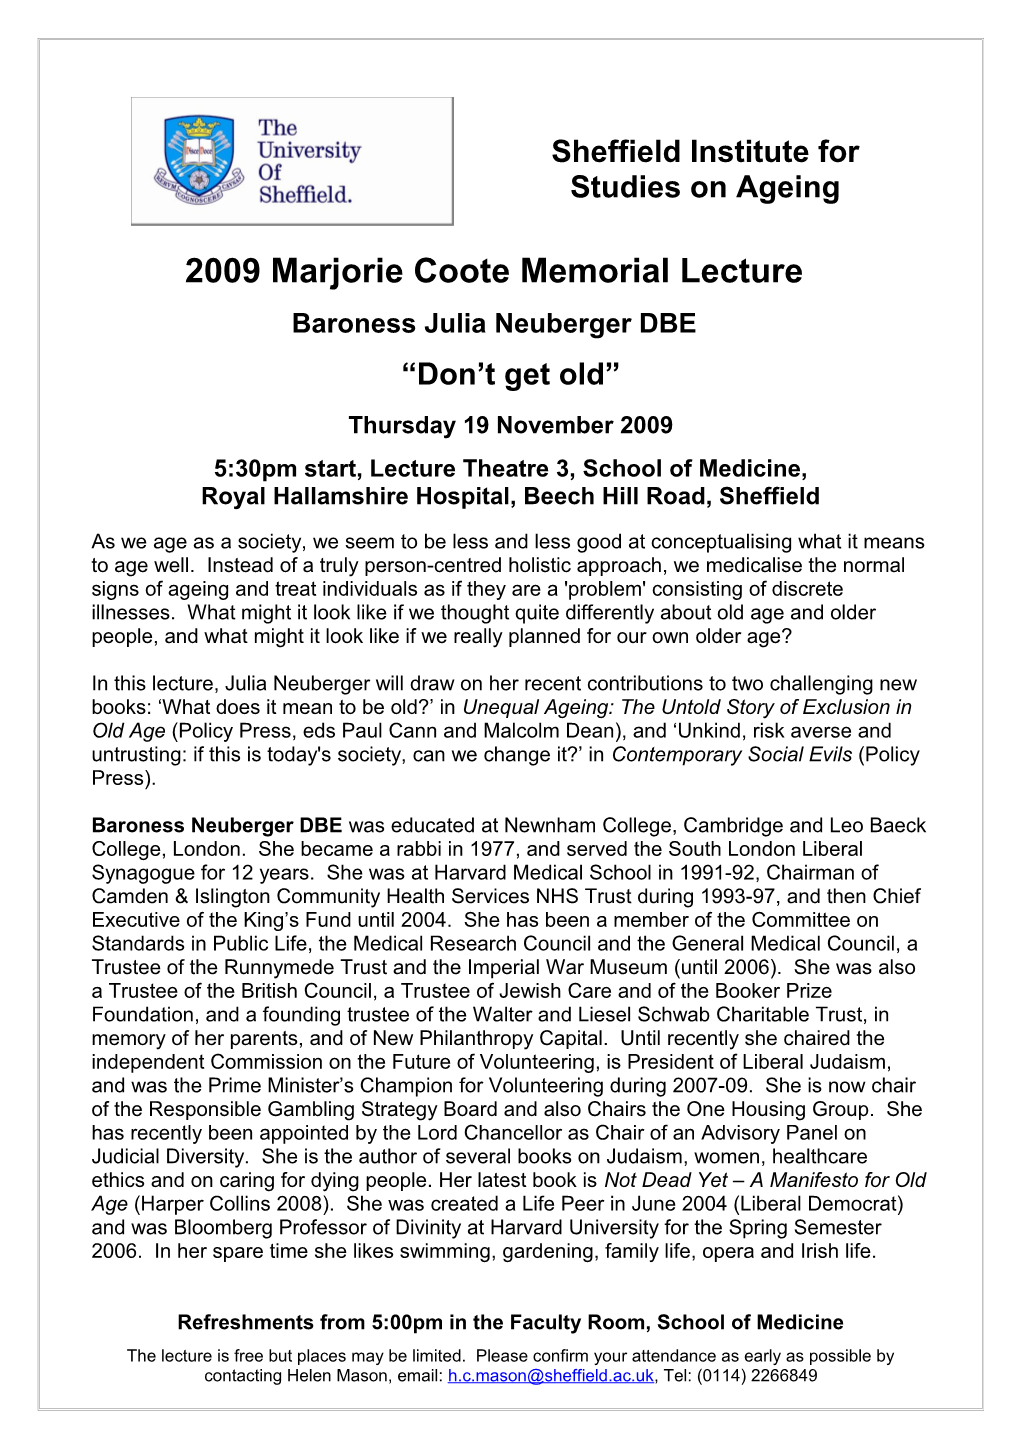 2005 Marjorie Coote Annual Lecture